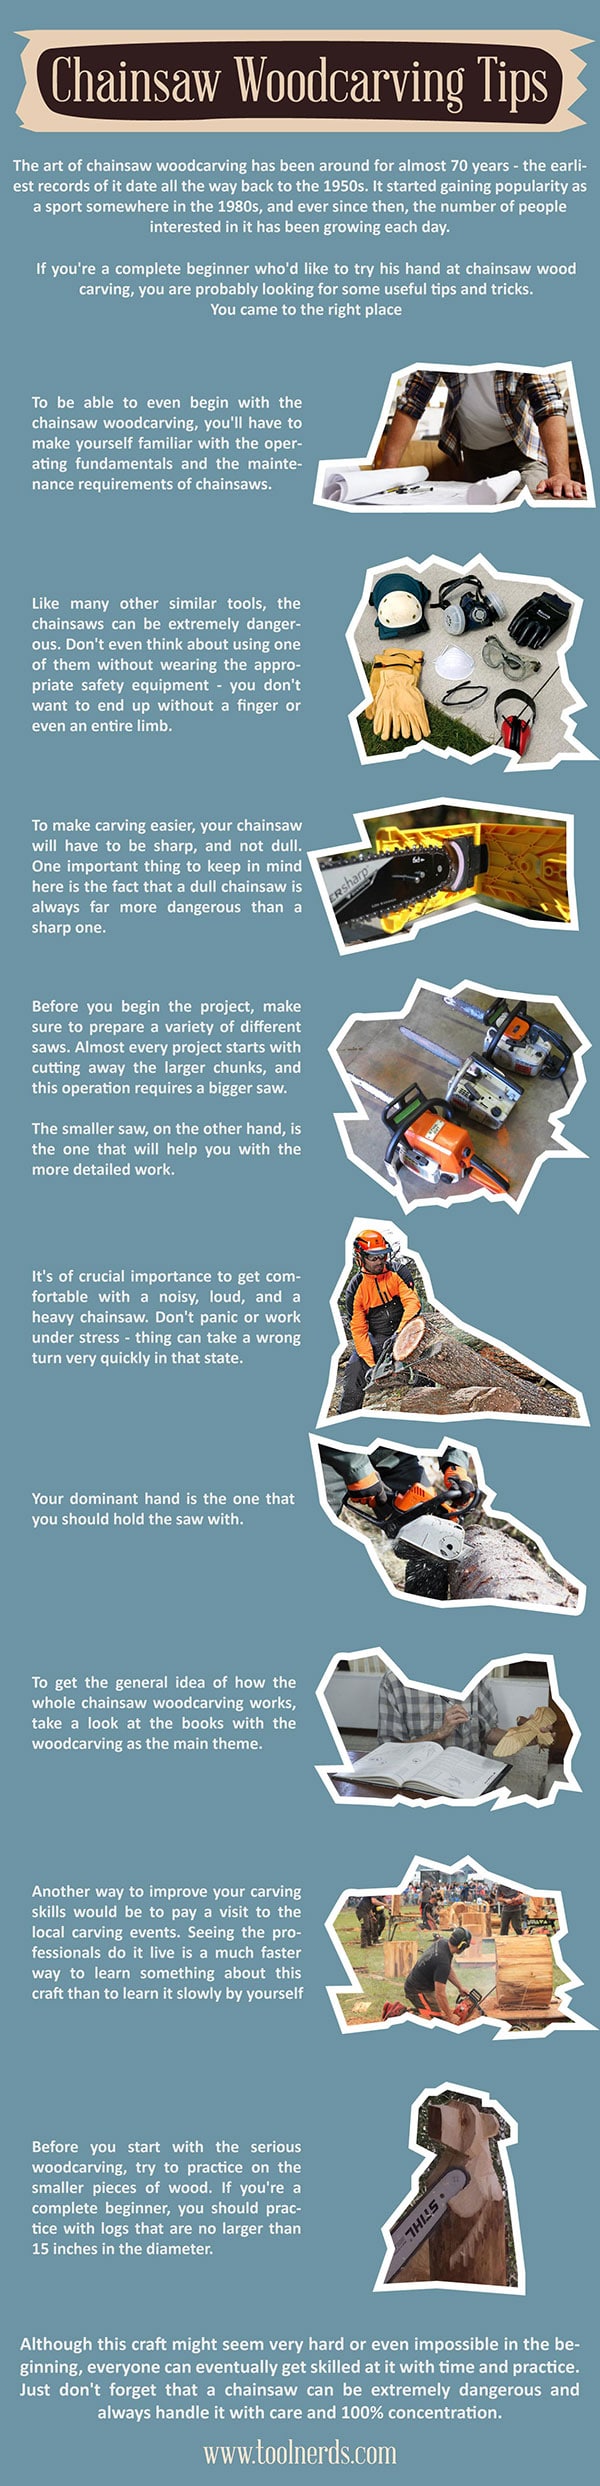 Chainsaw Woodcarving Tips - infographic